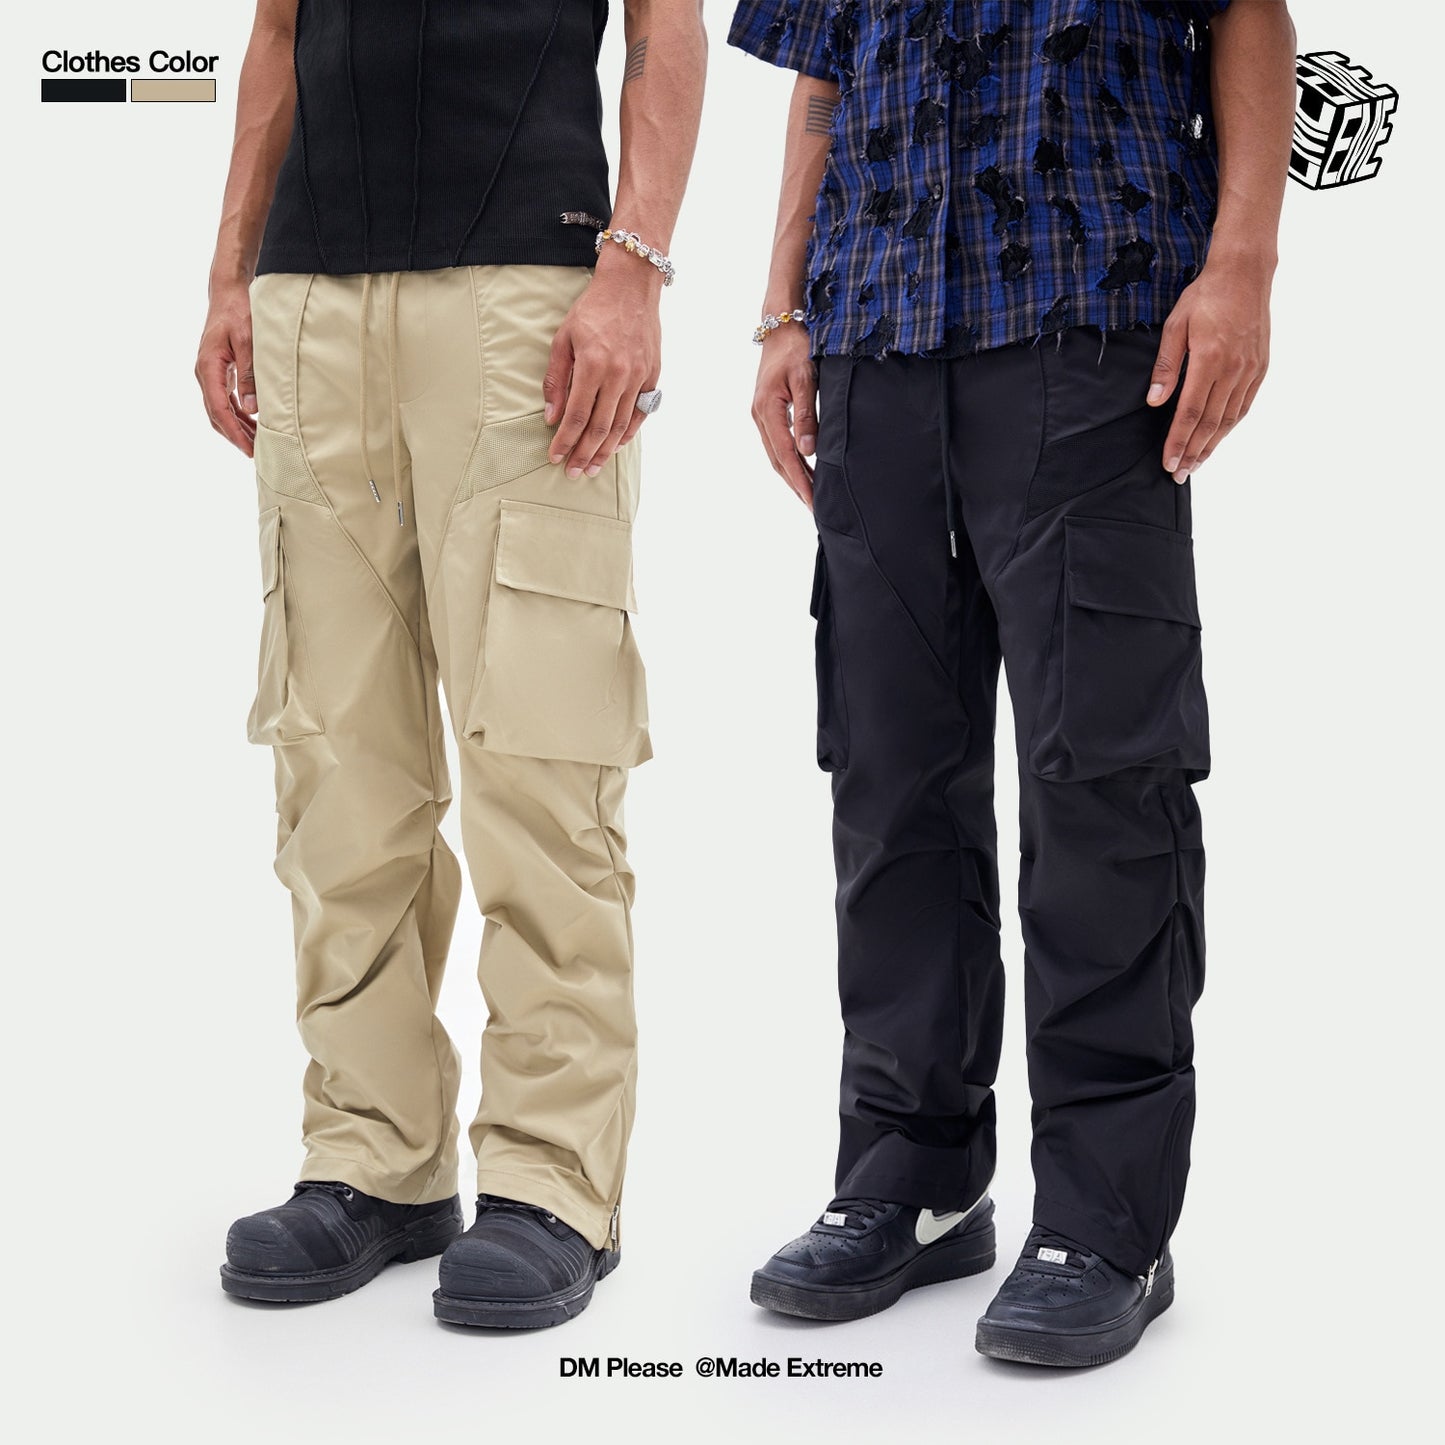 MADEEXTREME Pleated Pockets Casual Cargo Pants